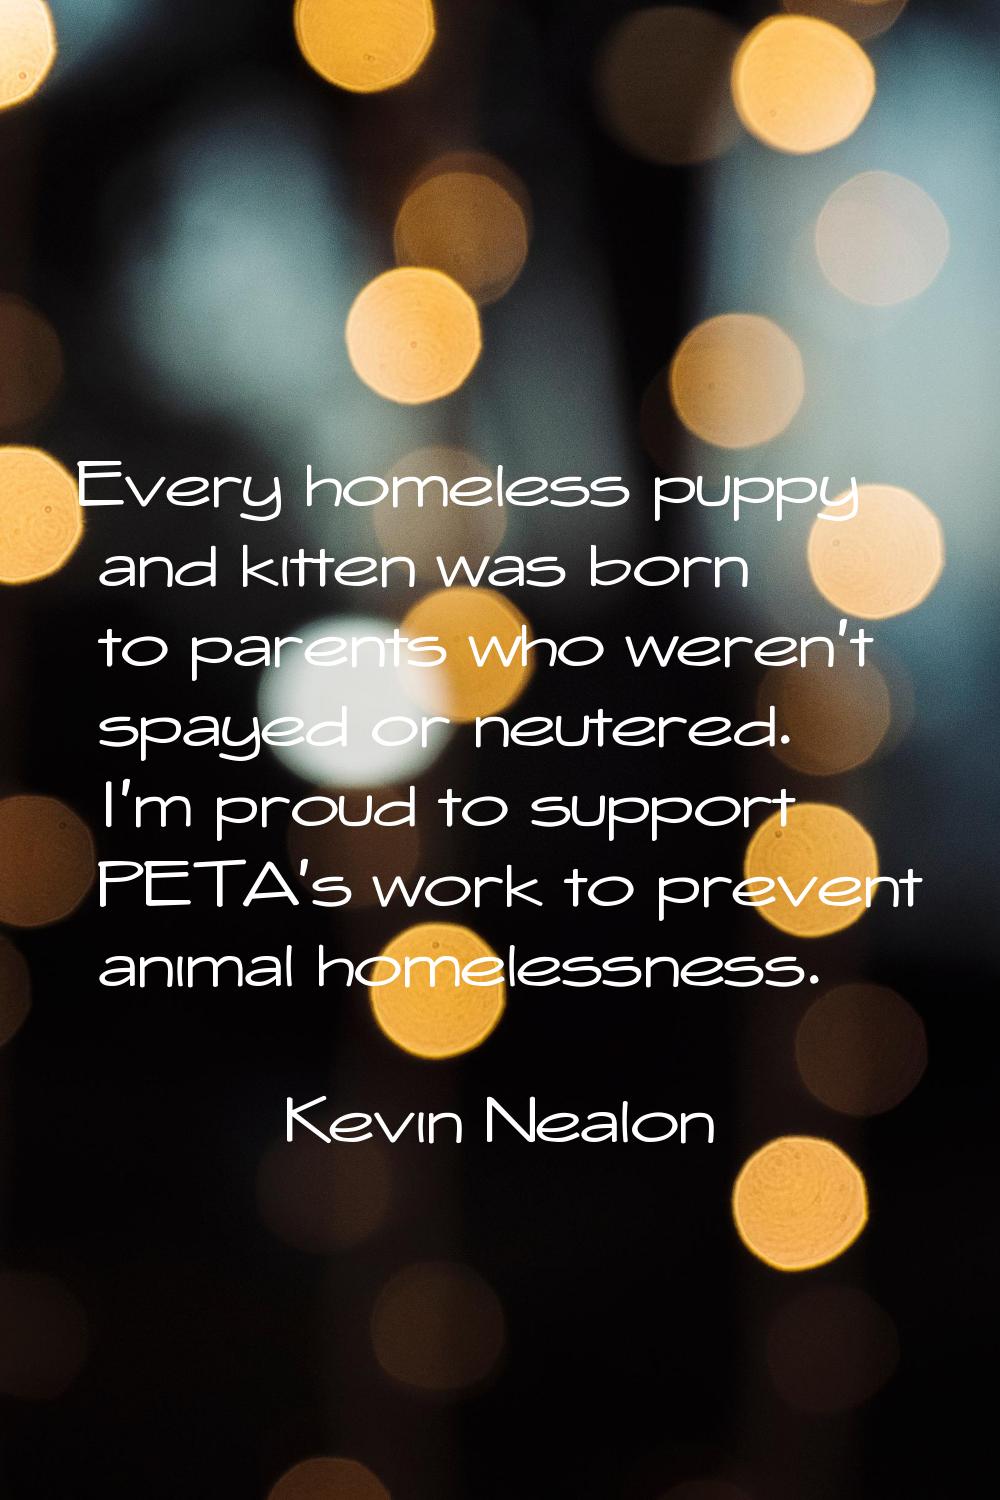 Every homeless puppy and kitten was born to parents who weren't spayed or neutered. I'm proud to su